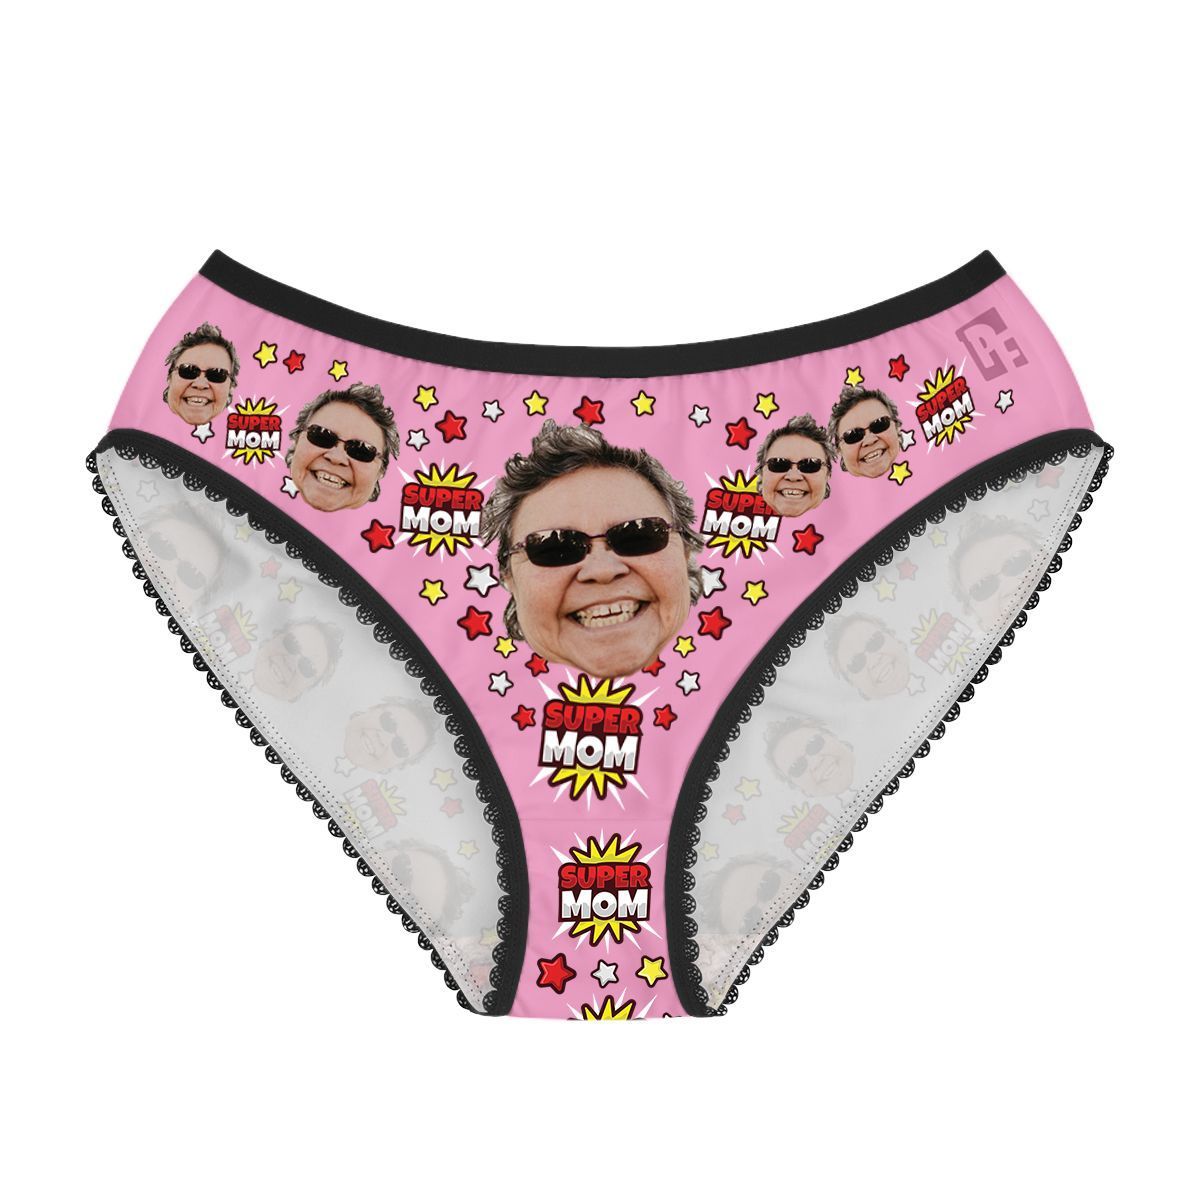 Pink Super mom women's underwear briefs personalized with photo printed on them